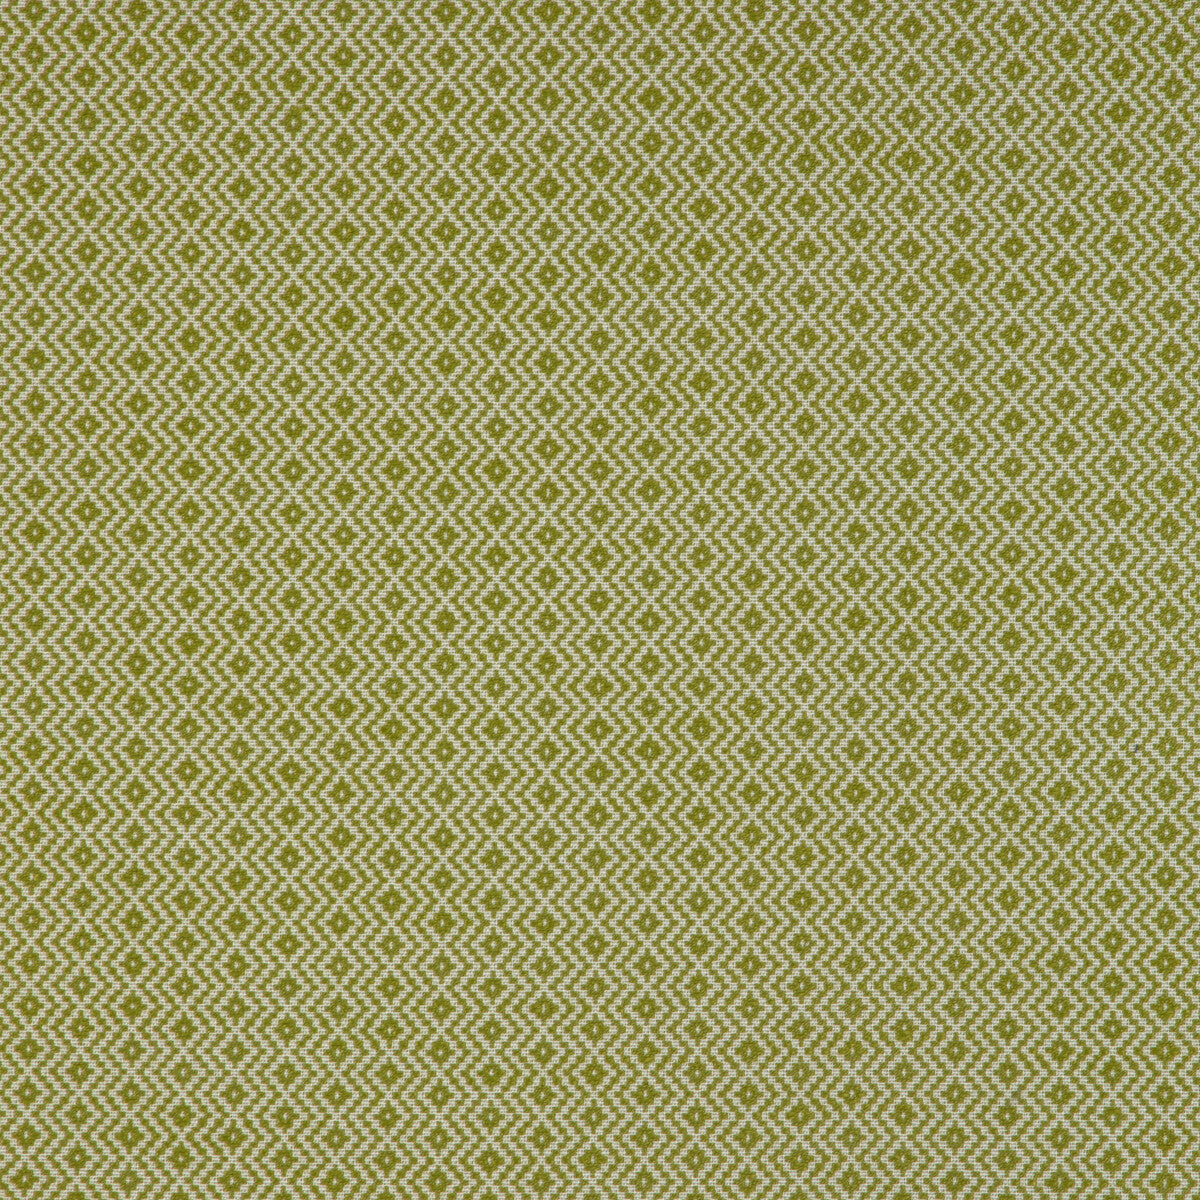 Kravet Design fabric in 36884-3 color - pattern 36884.3.0 - by Kravet Design in the Insideout Seaqual Initiative collection